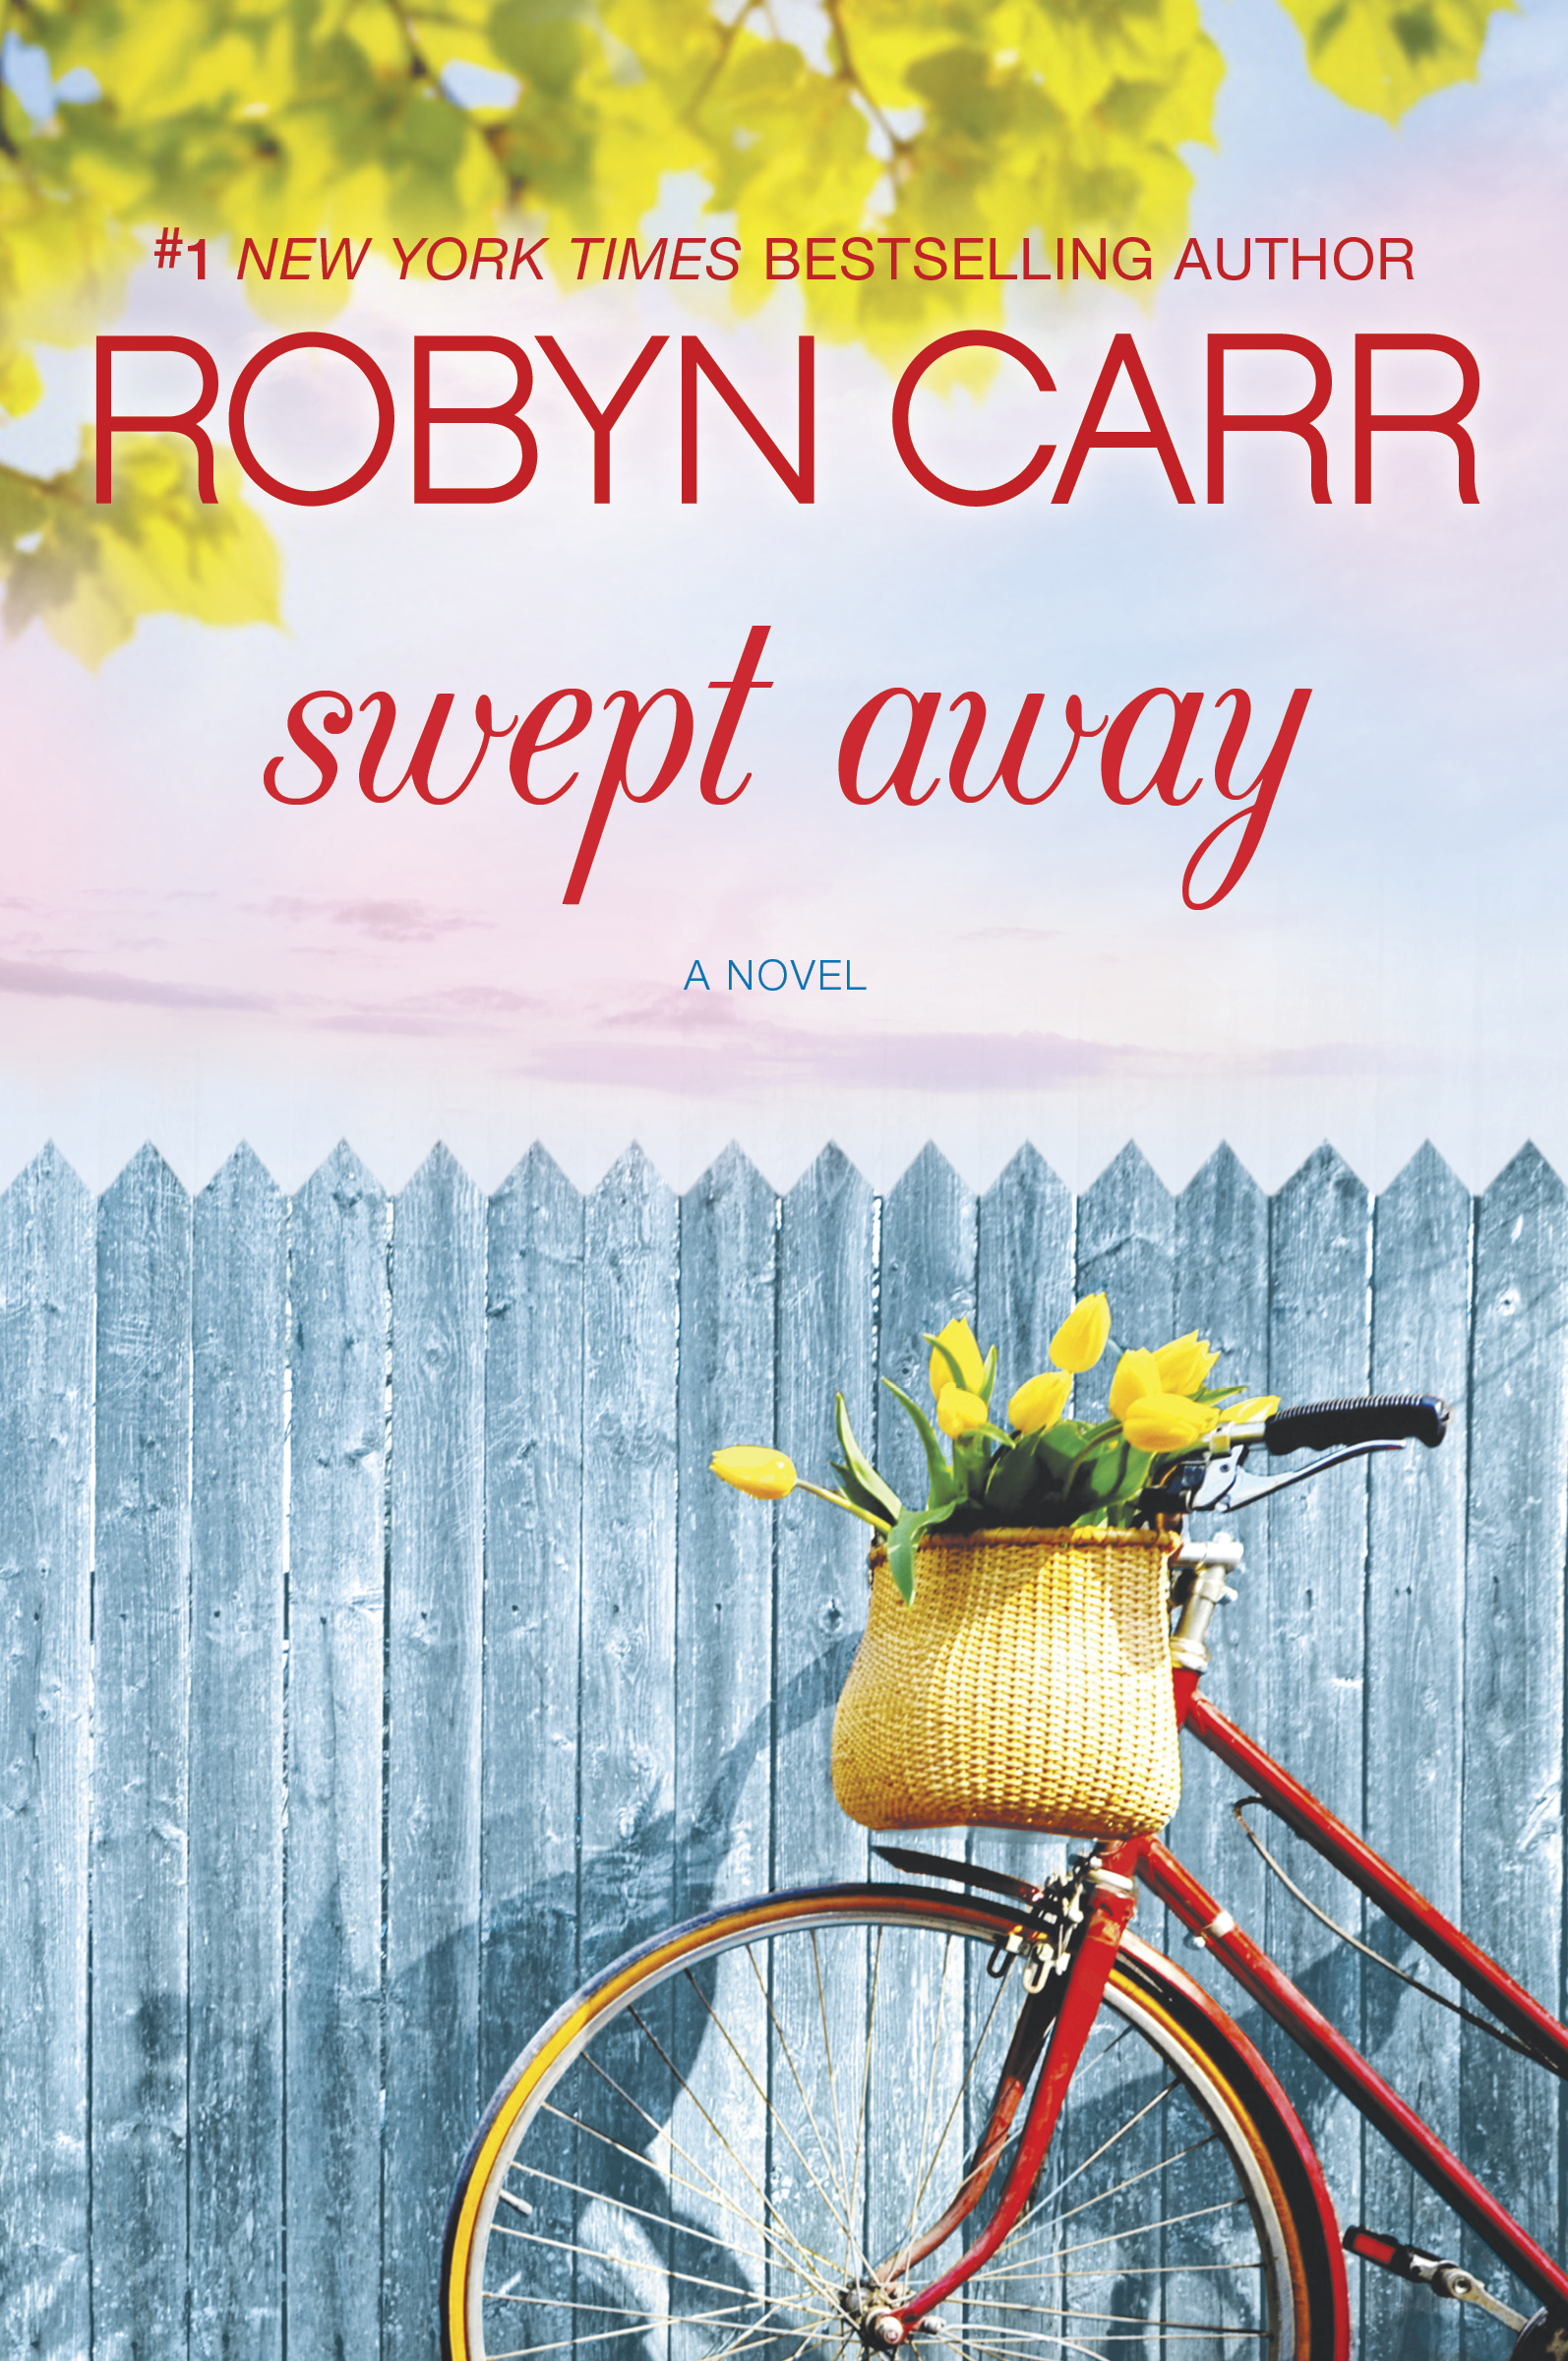 Swept Away (2016) by Robyn Carr